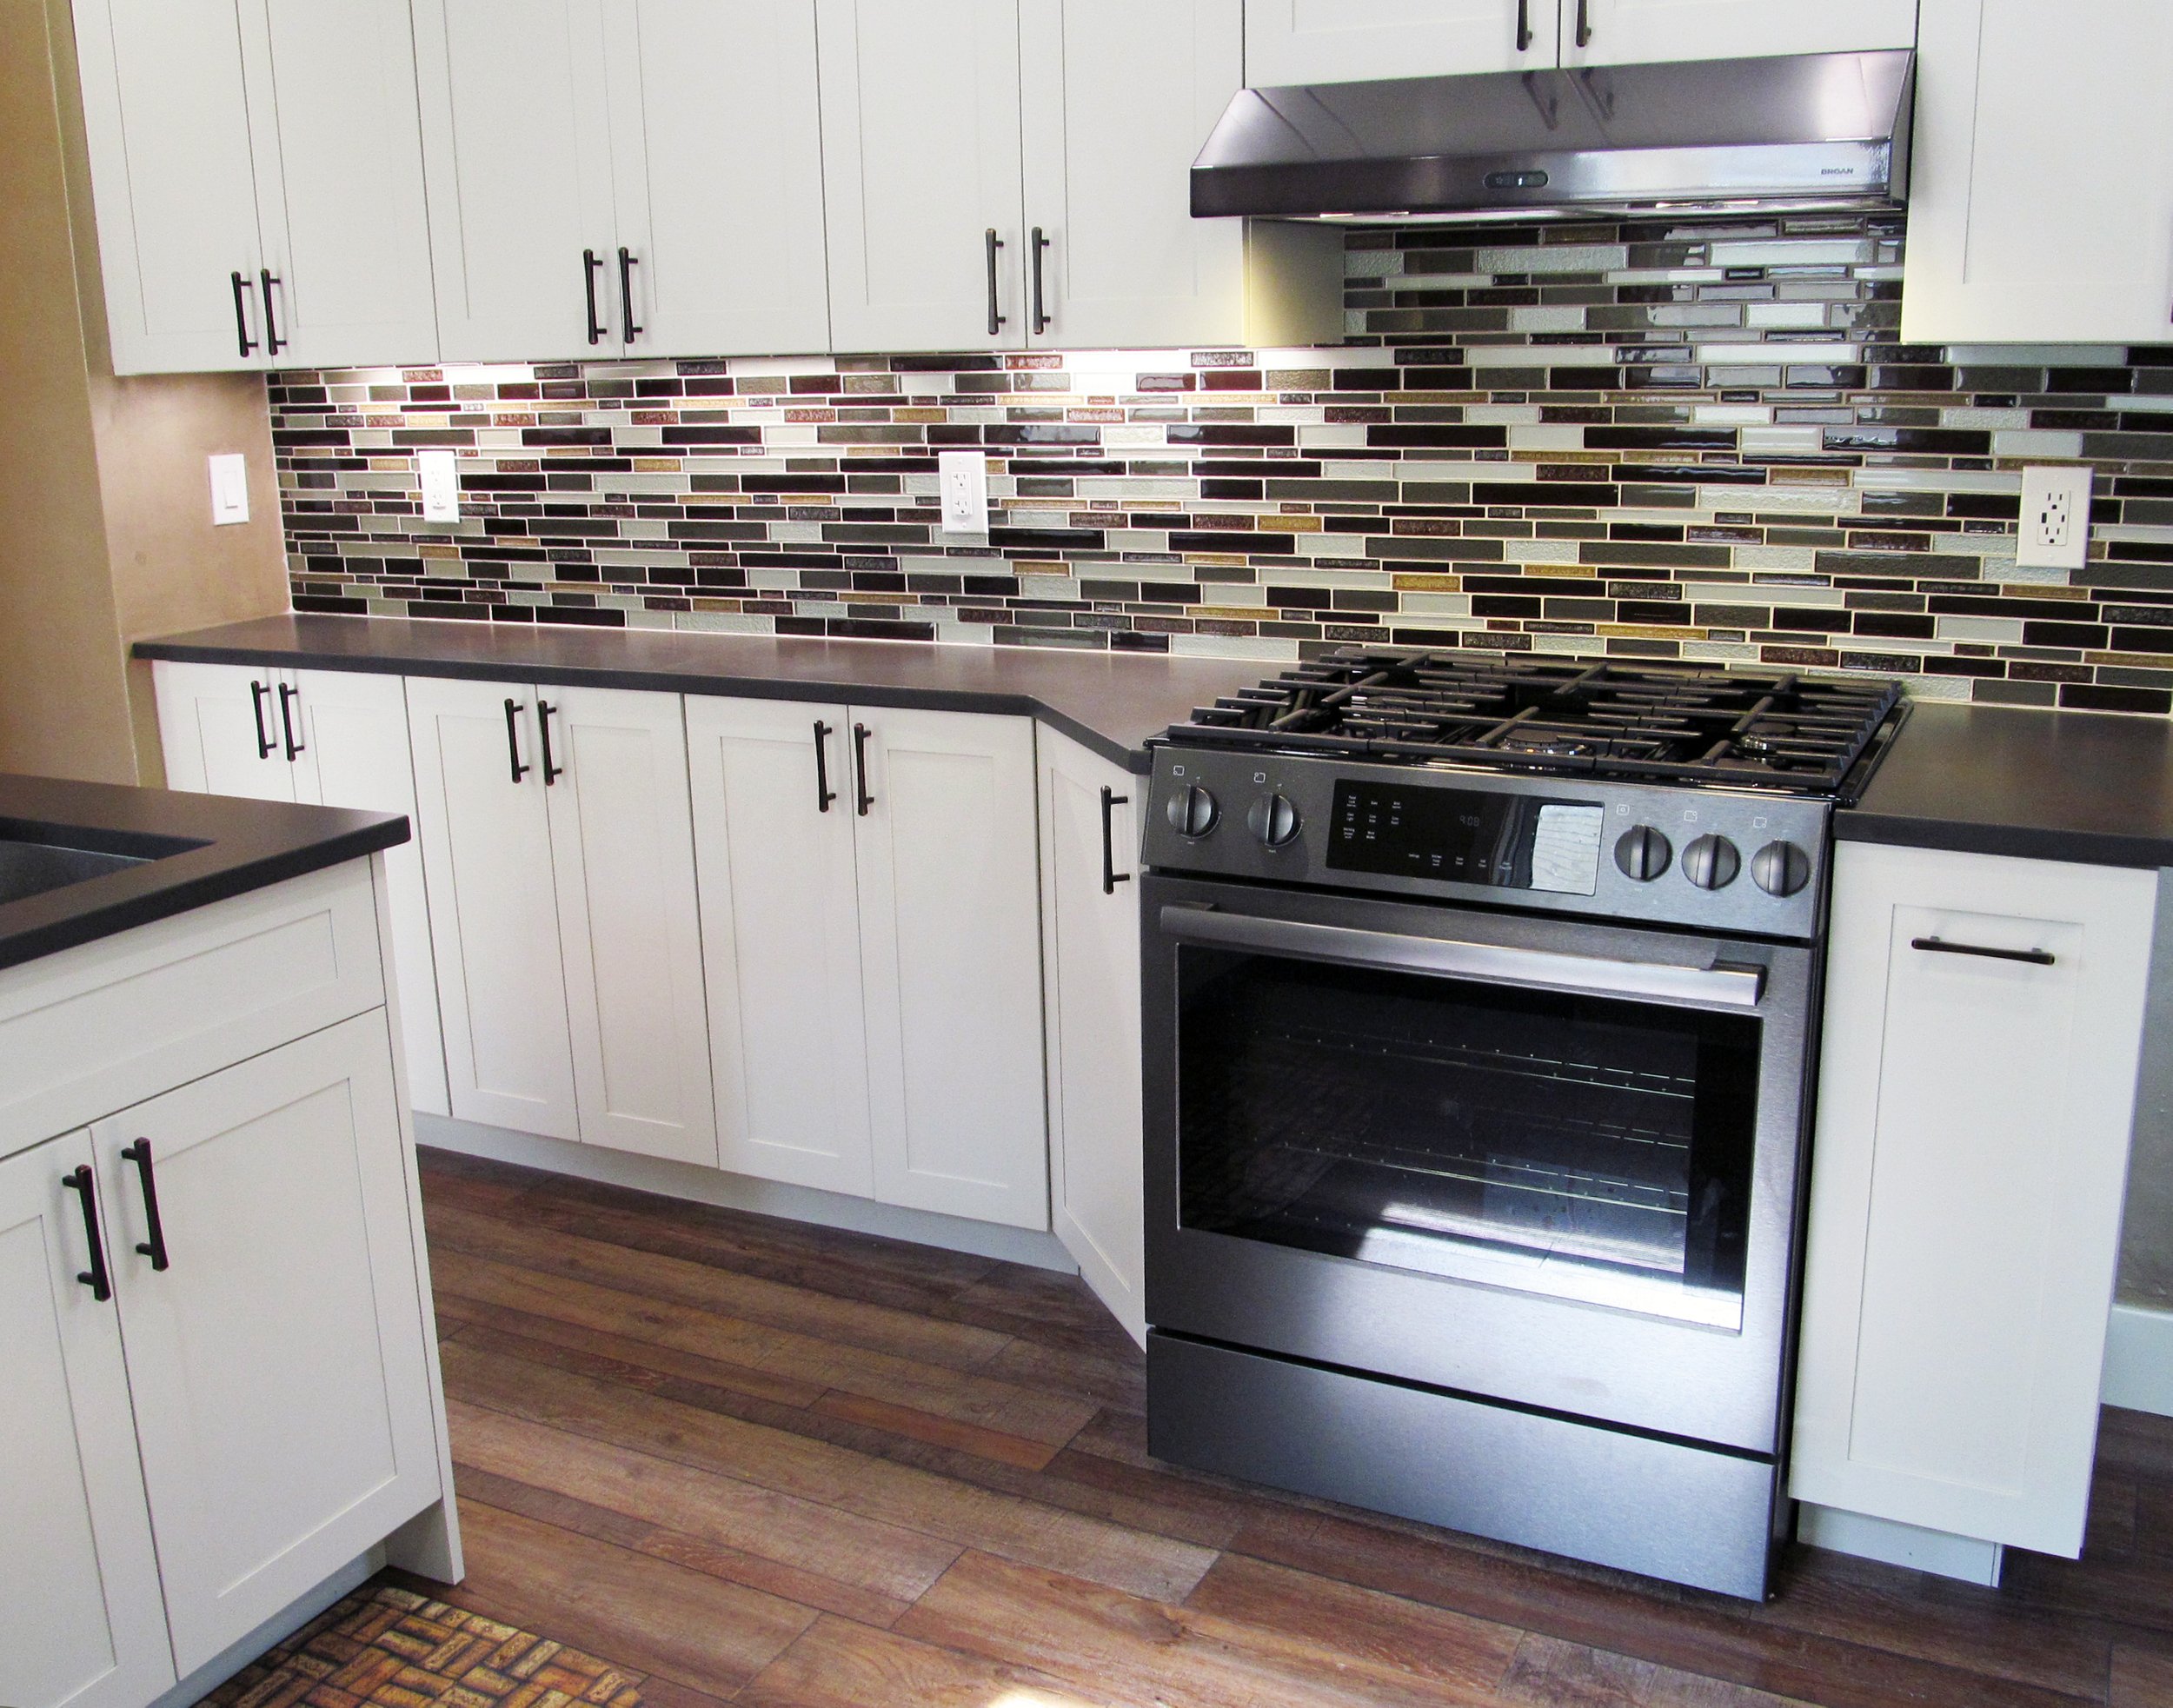 Shallow cabinets to the left of the range add storage to a previously unused space